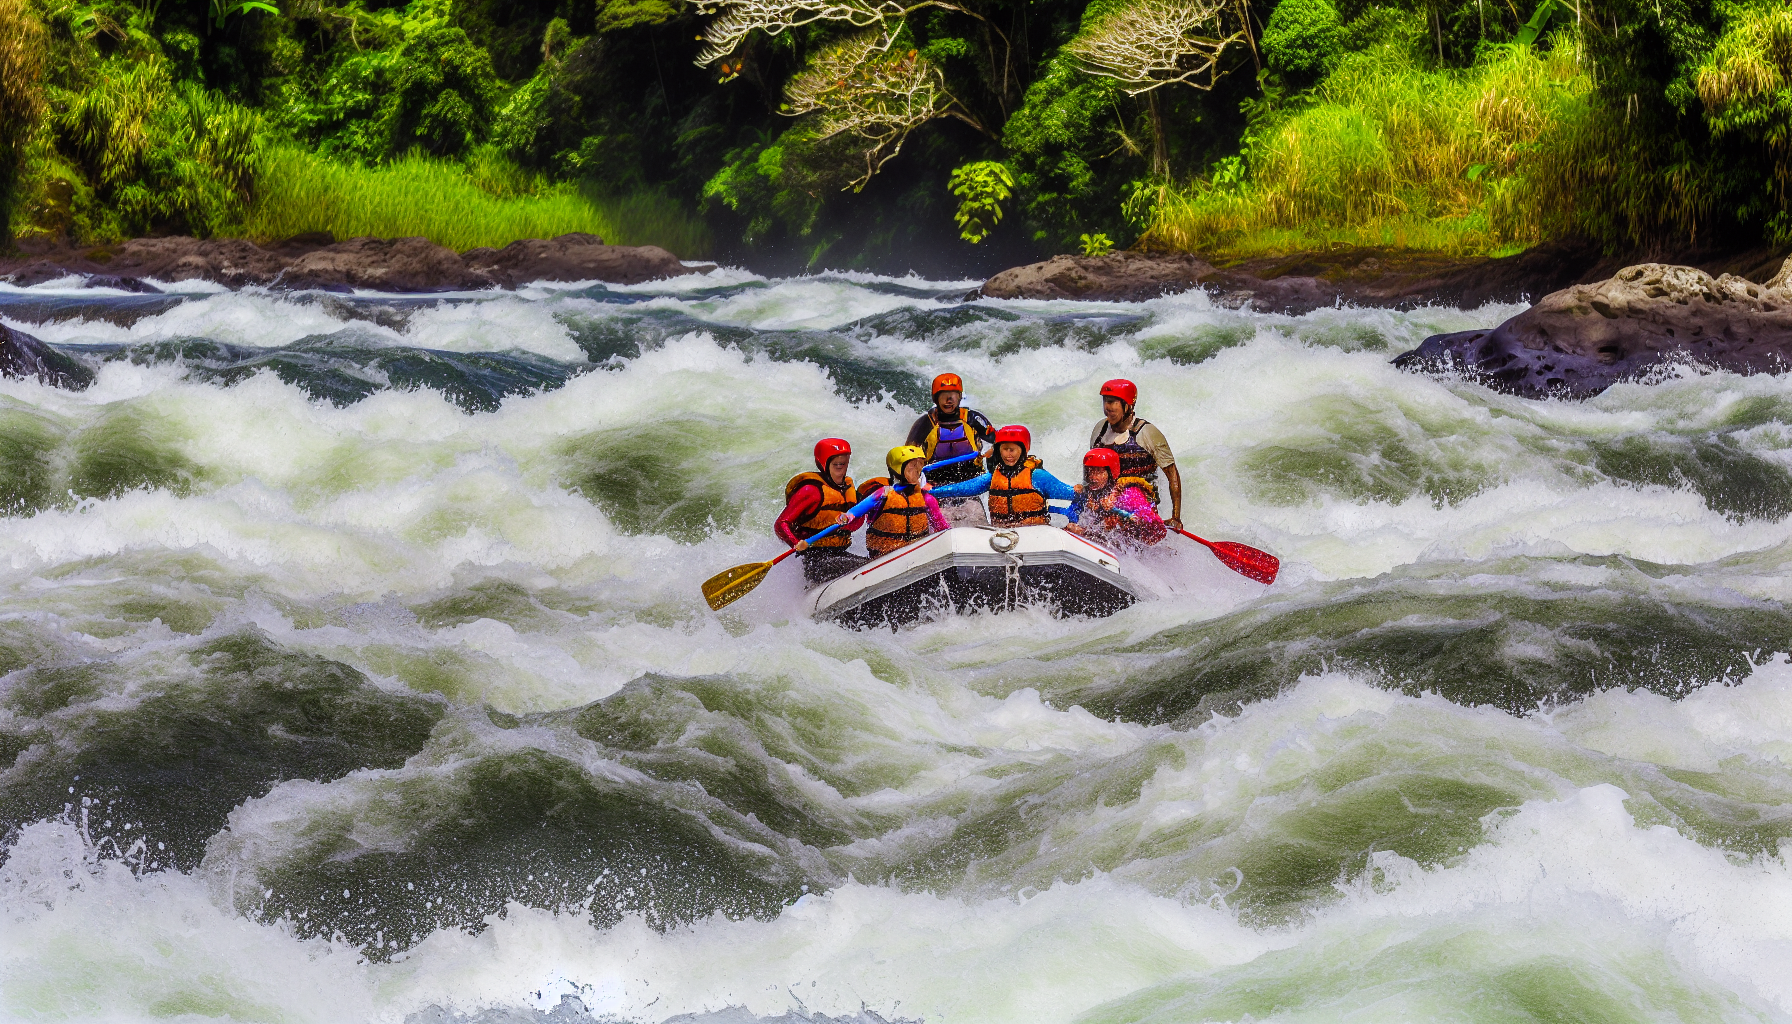 Exciting white water rafting adventure with lush greenery and rapids